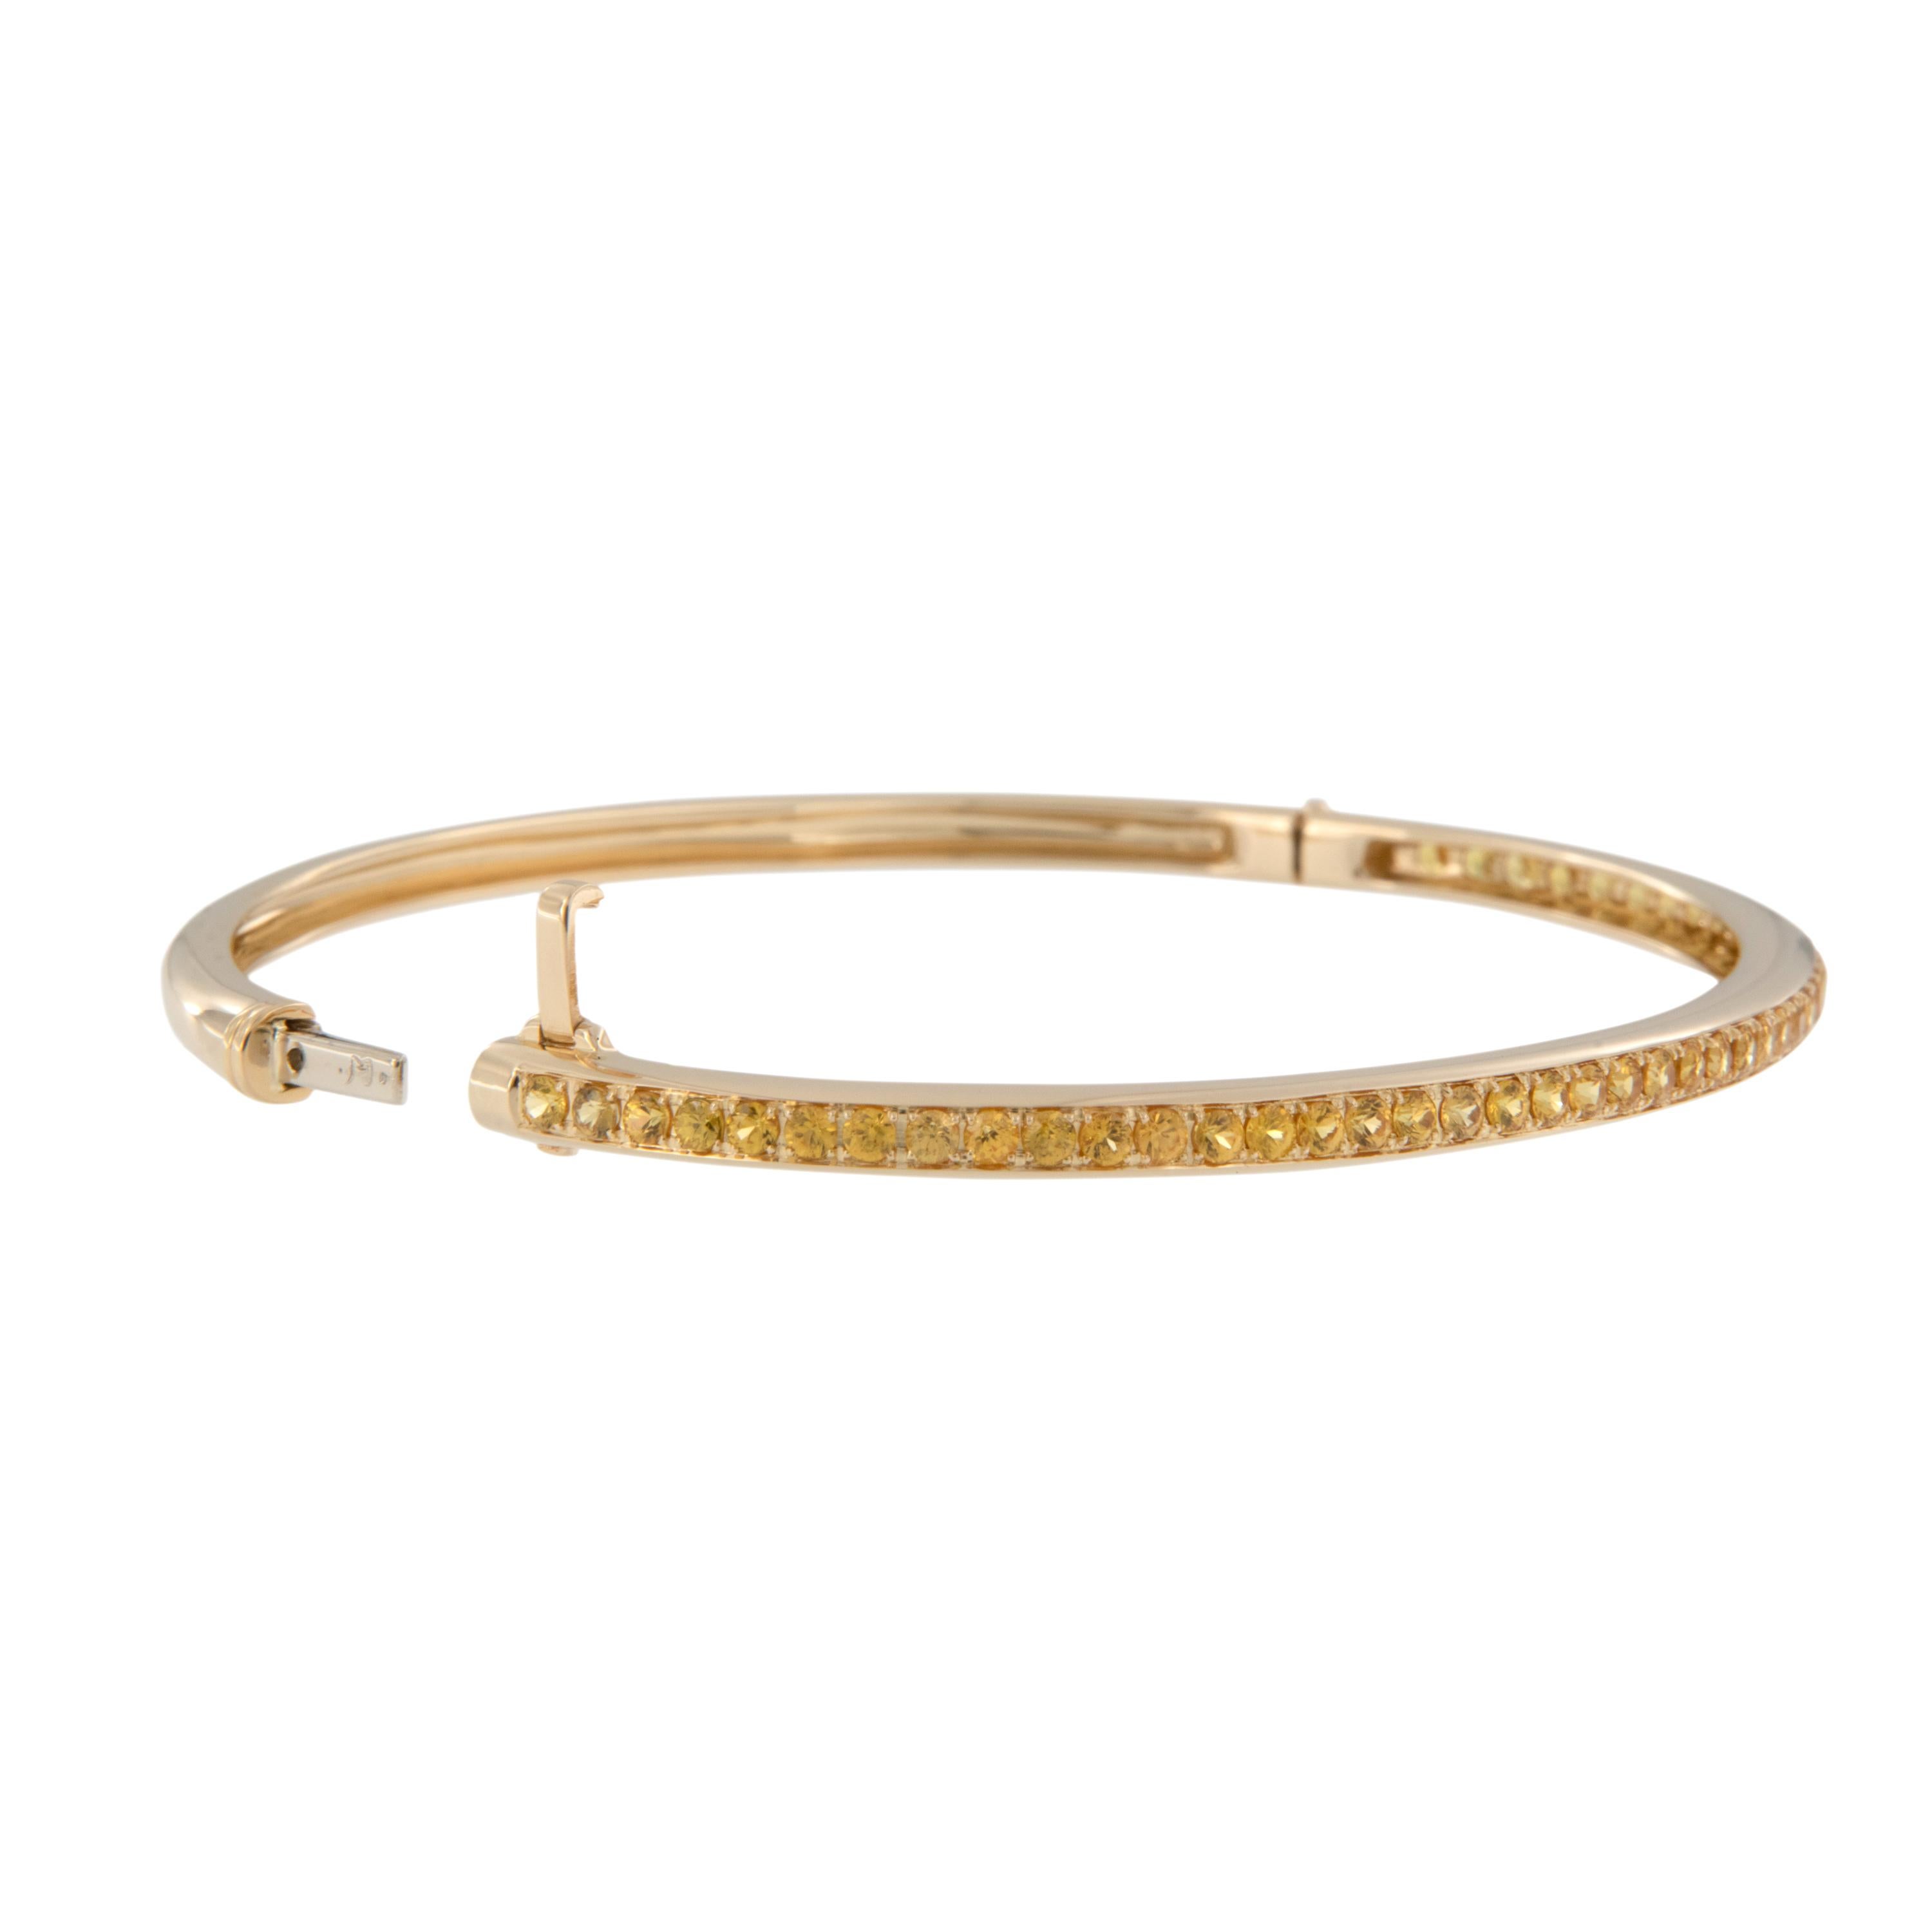 This bracelet is like wearing sunshine on your wrist! Classic oval design & shape sparkling with 1.69 Cttw of sunny yellow sapphires set in rich 18 karat yellow gold for a classic look by Suarez. Worn on its own or stacked with other bangles, this